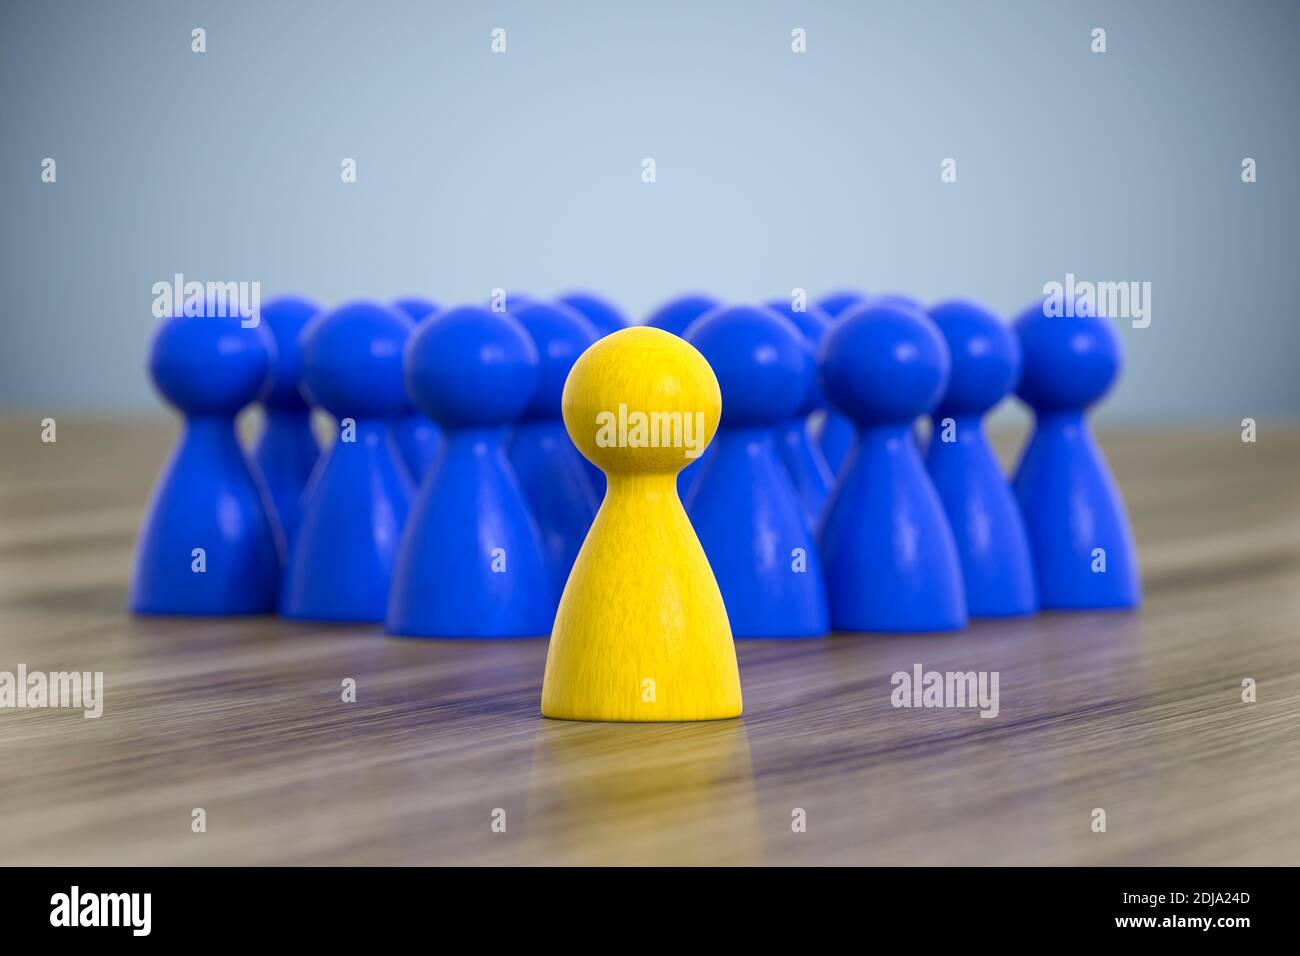 3d illustration of a group of game figures Stock Photo